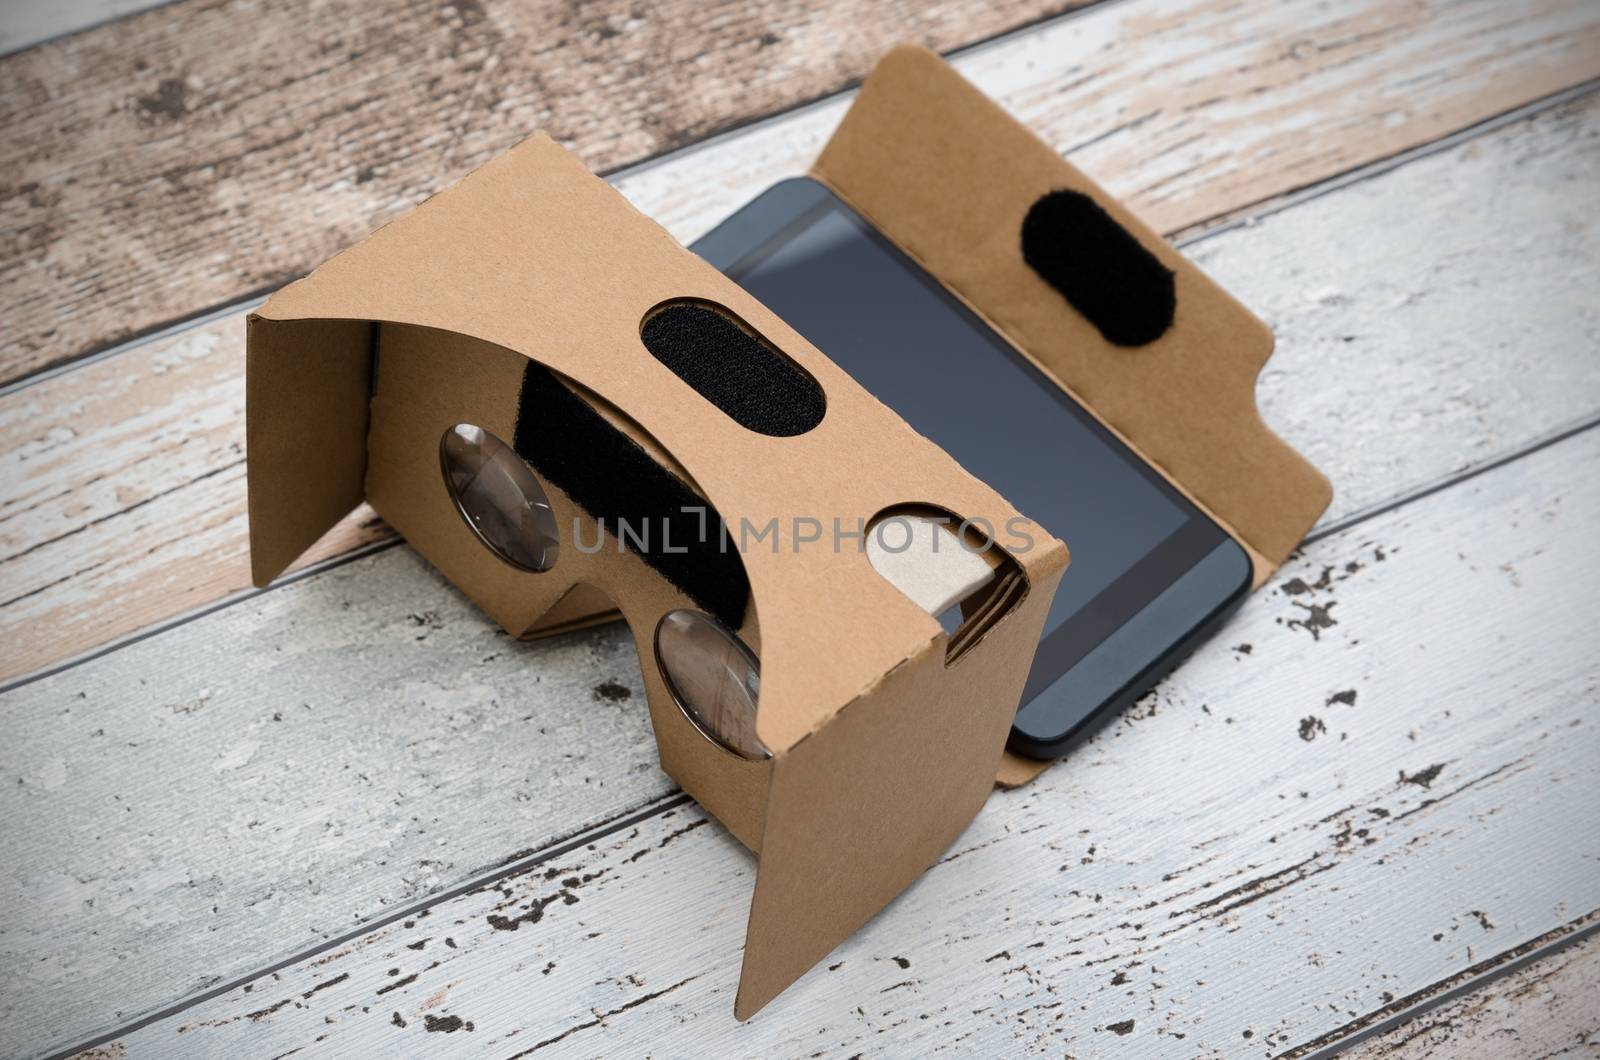 Virtual reality cardboard glasses. Easy way to watch movies in 3D. Shoot on wooden background.